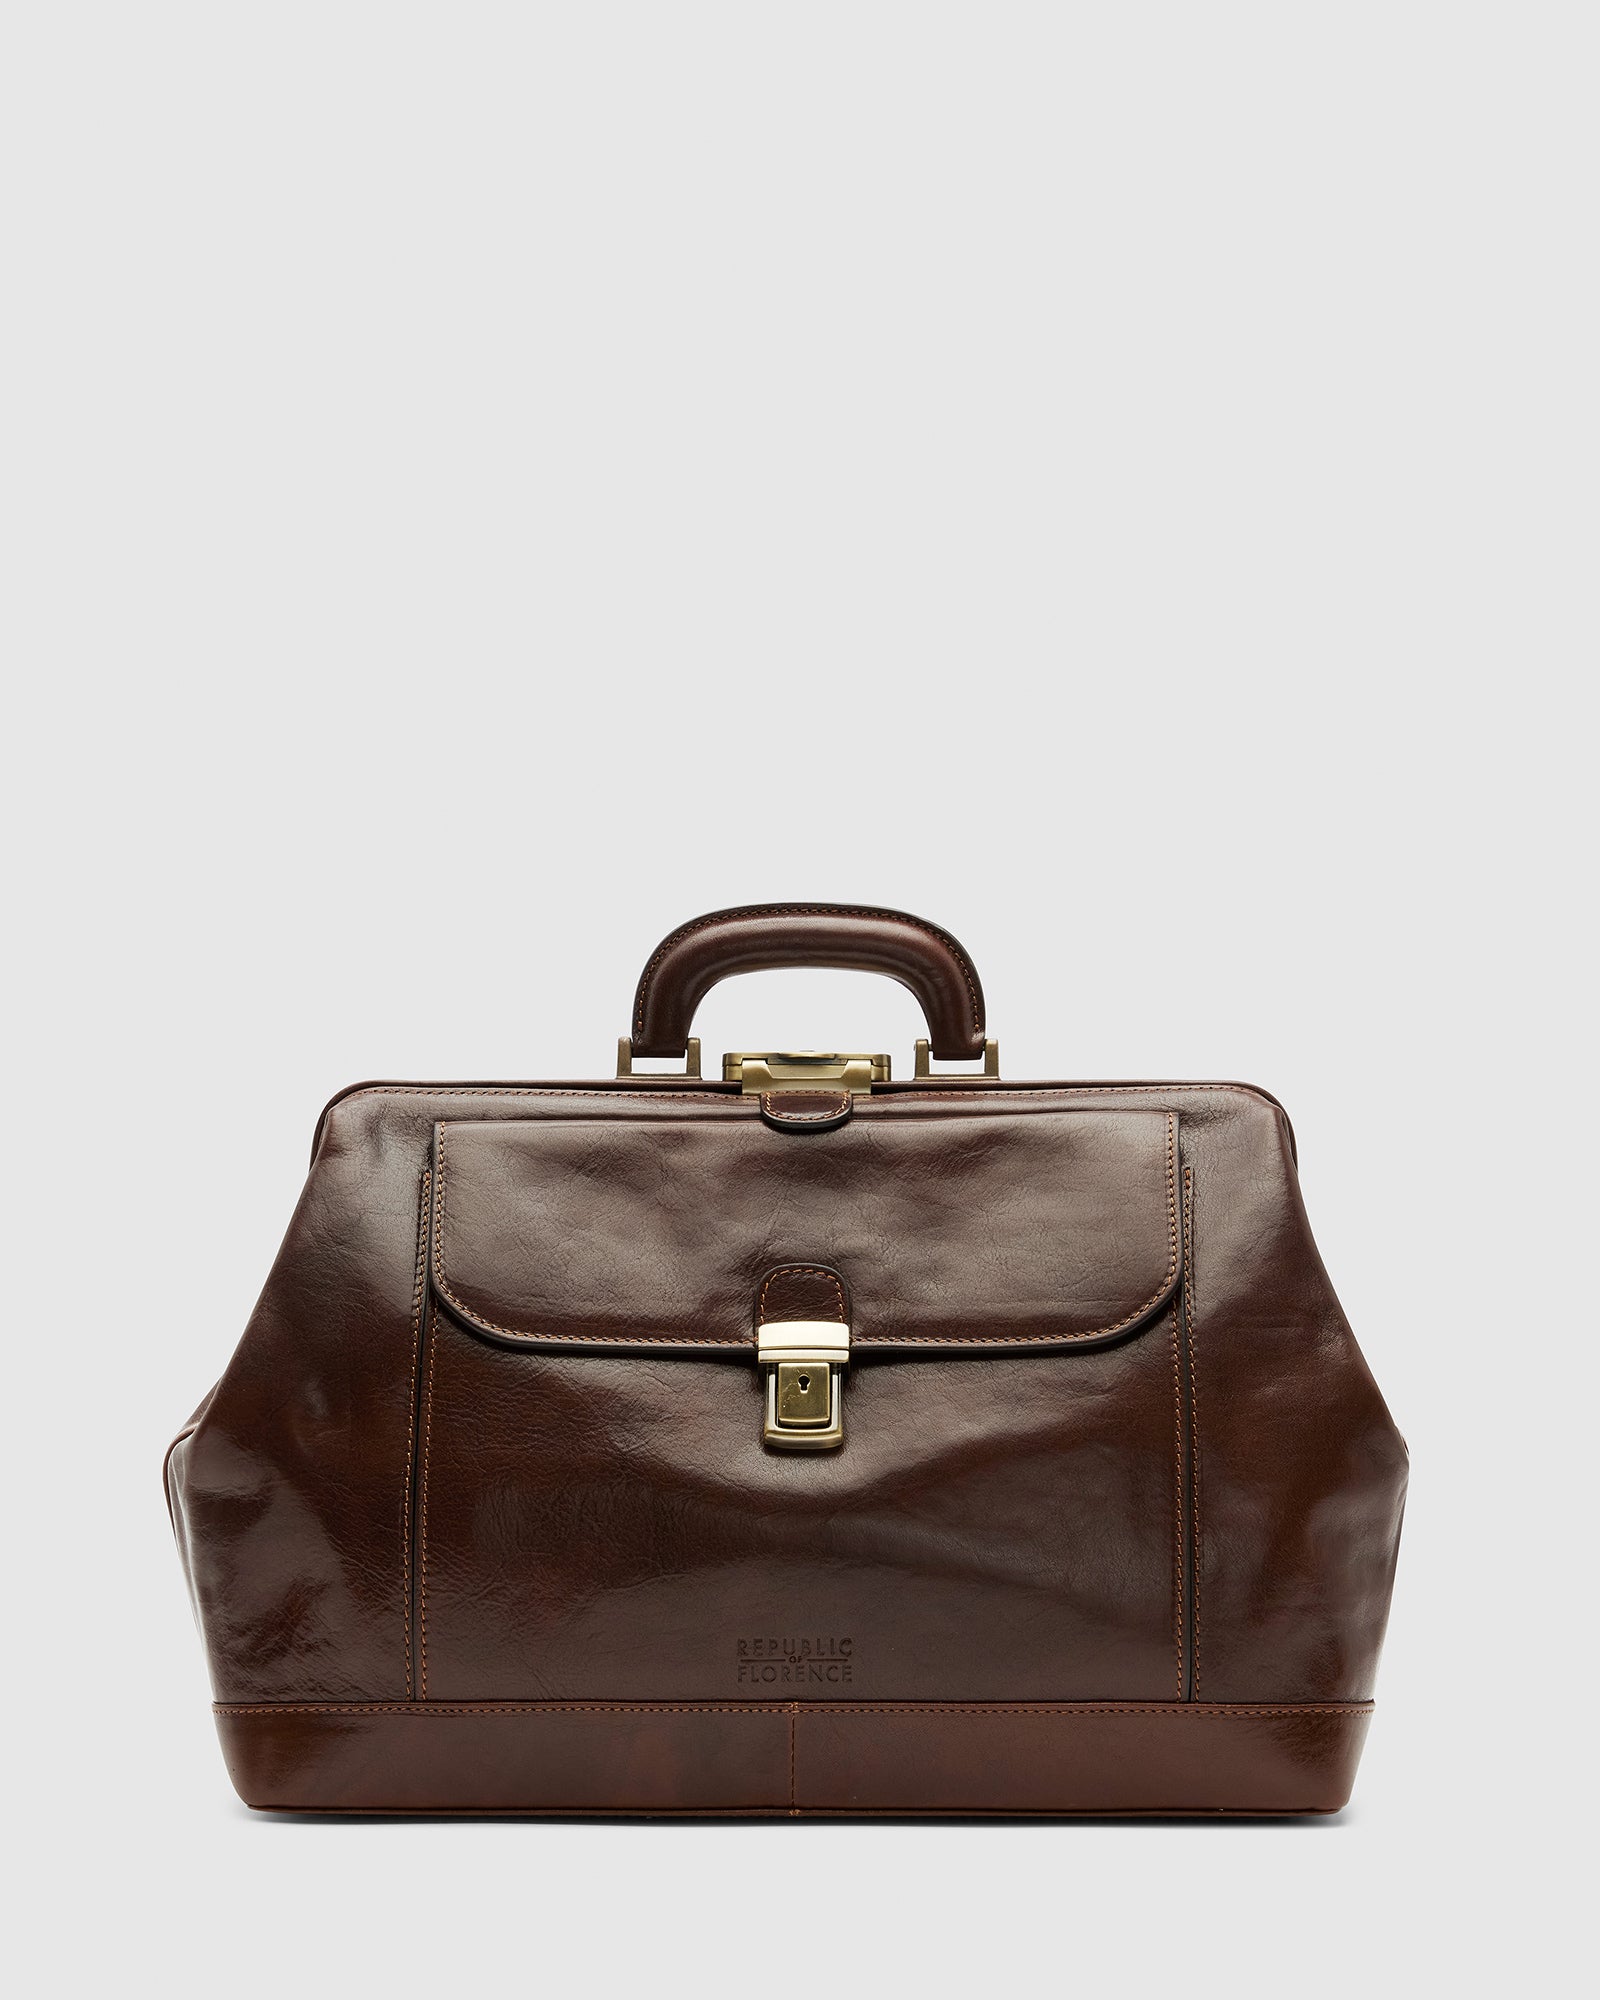 Panacea Brown - Leather Doctor Bag